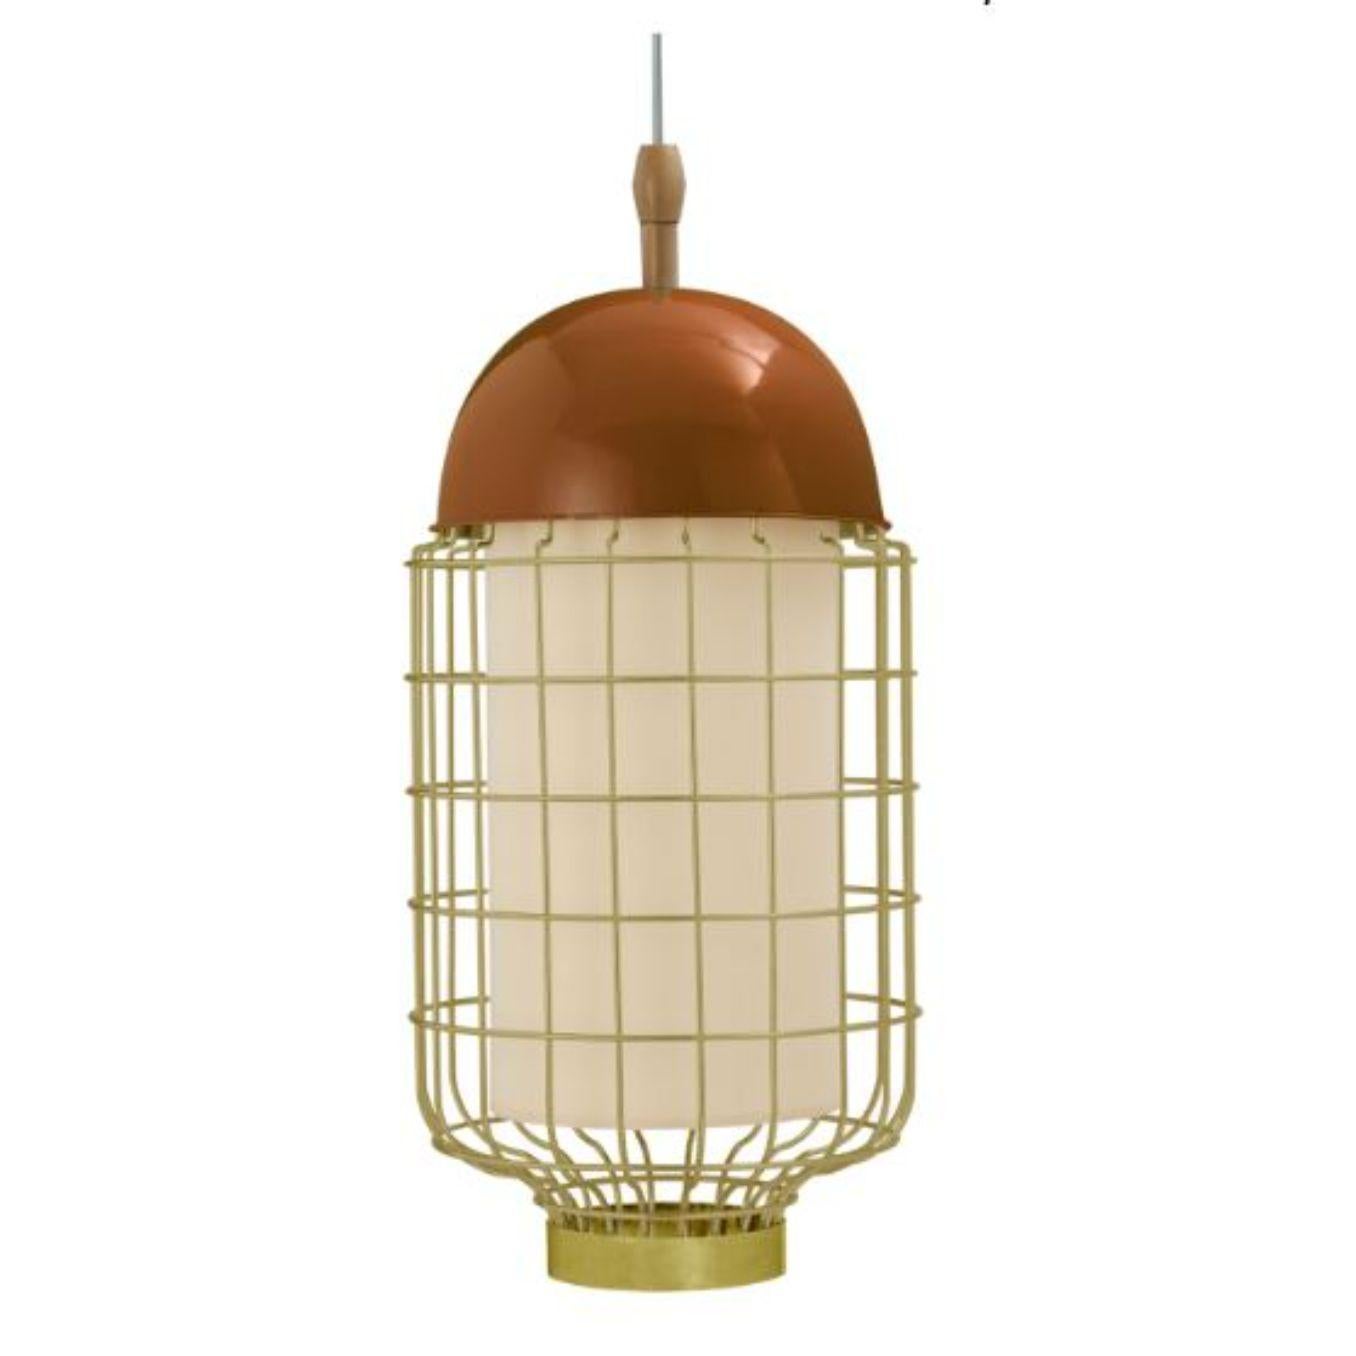 Copper magnolia II suspension lamp by Dooq.
Dimensions: W 27 x D 27 x H 59 cm.
Materials: lacquered metal, polished or brushed metal.
abat-jour: cotton
Also available in different colours and materials.

Information:
230V/50Hz
E27/1x20W